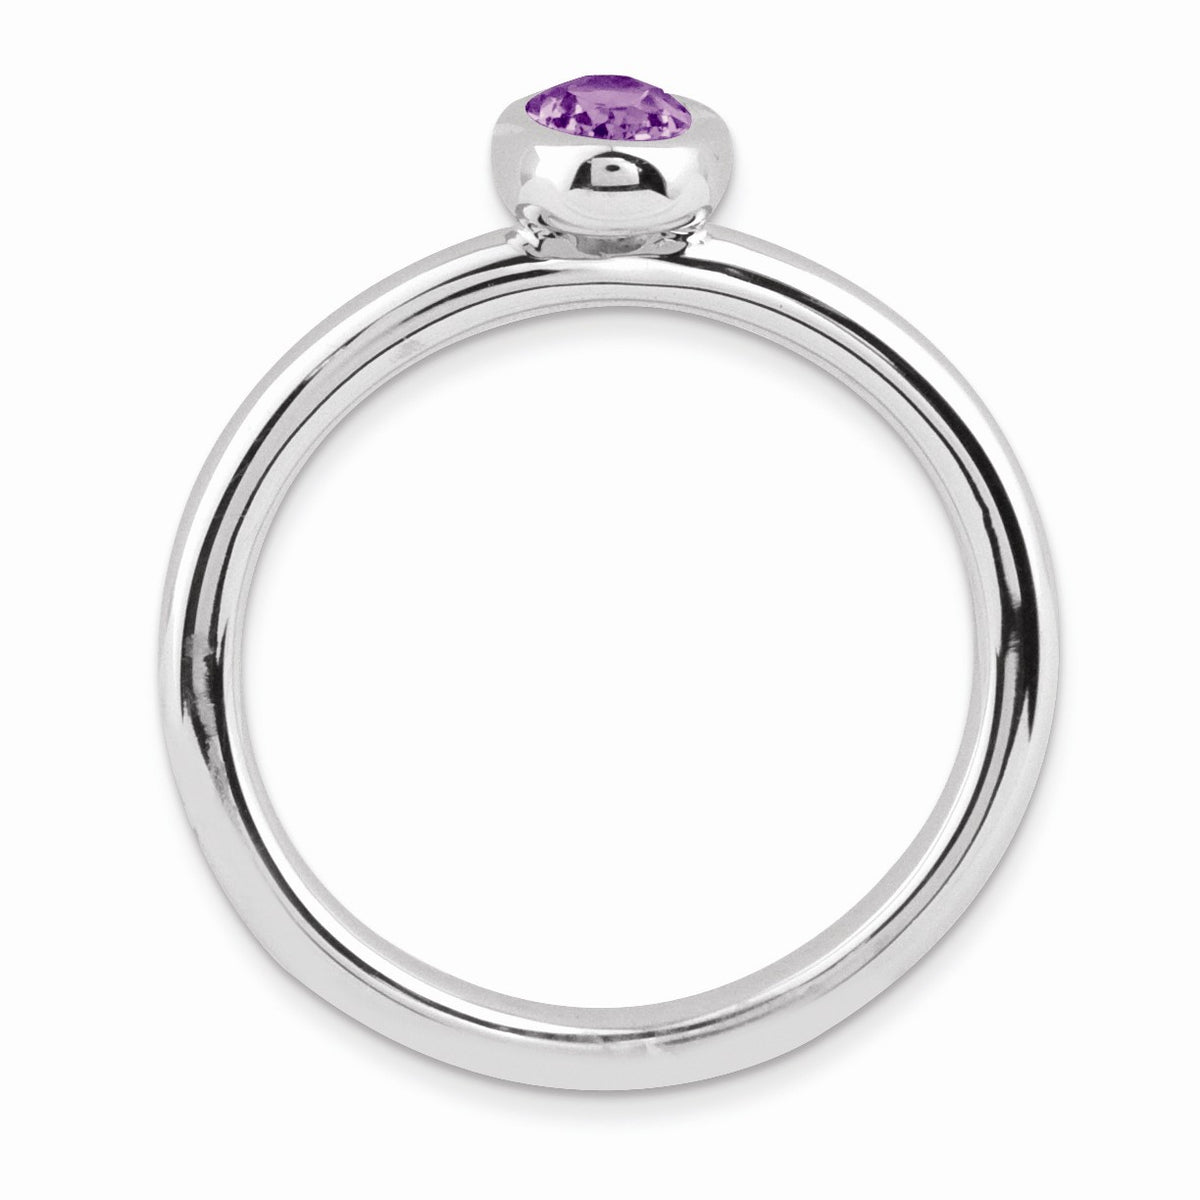 Alternate view of the Sterling Silver &amp; Amethyst Stackable Oval Solitaire Ring by The Black Bow Jewelry Co.